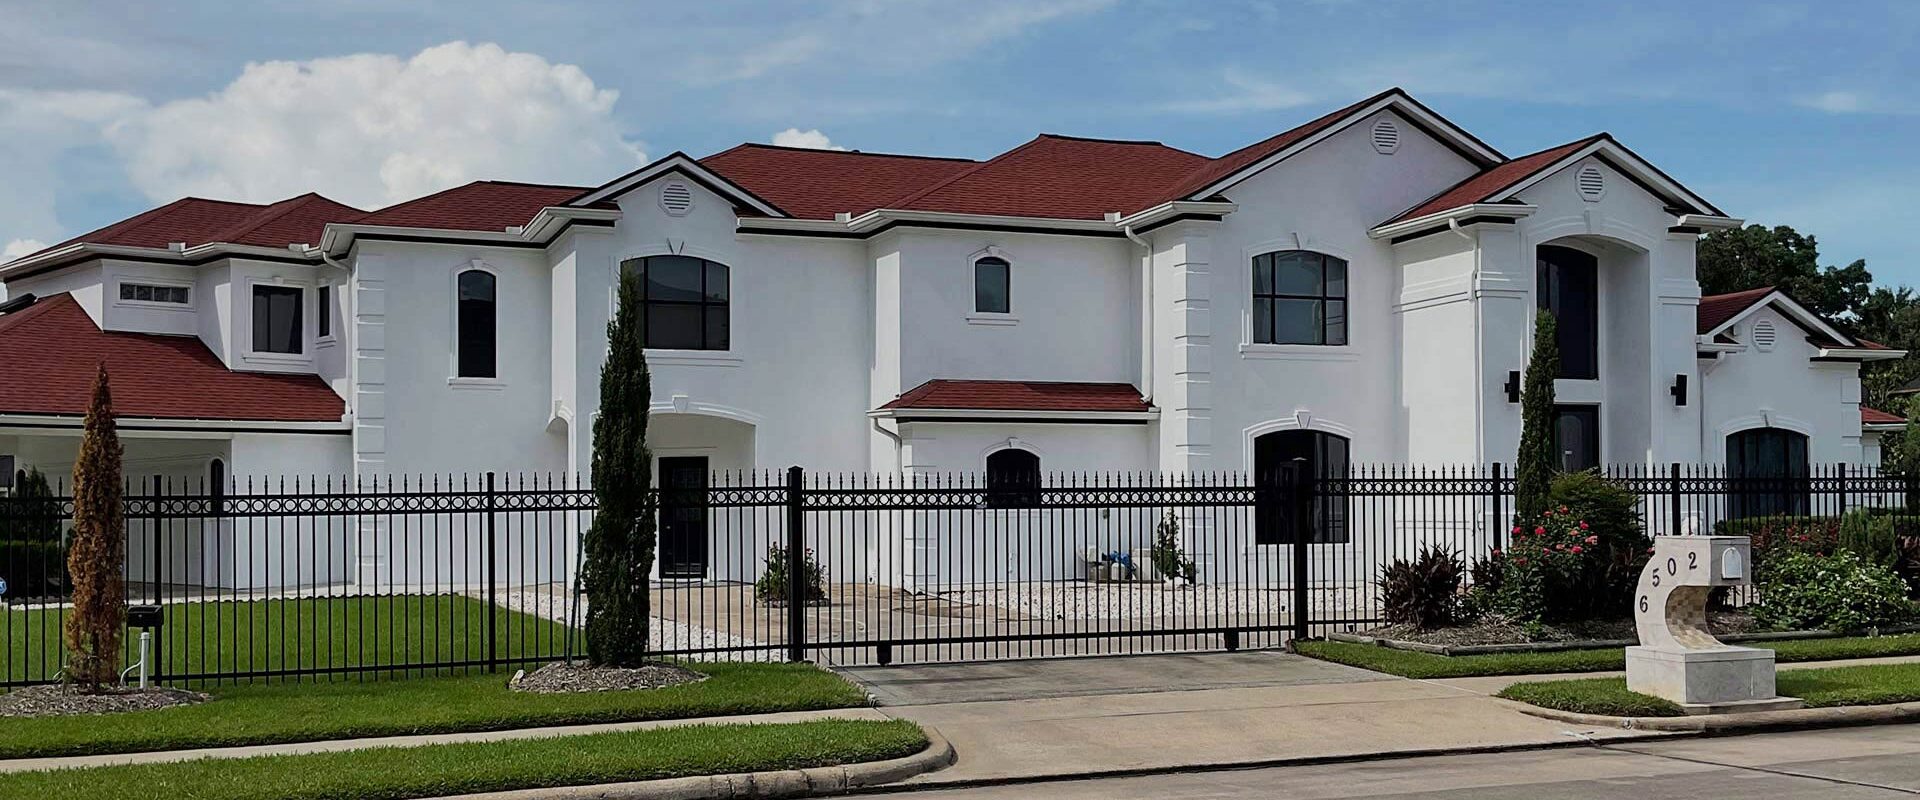 residential property exteriors with white wall painting houston tx